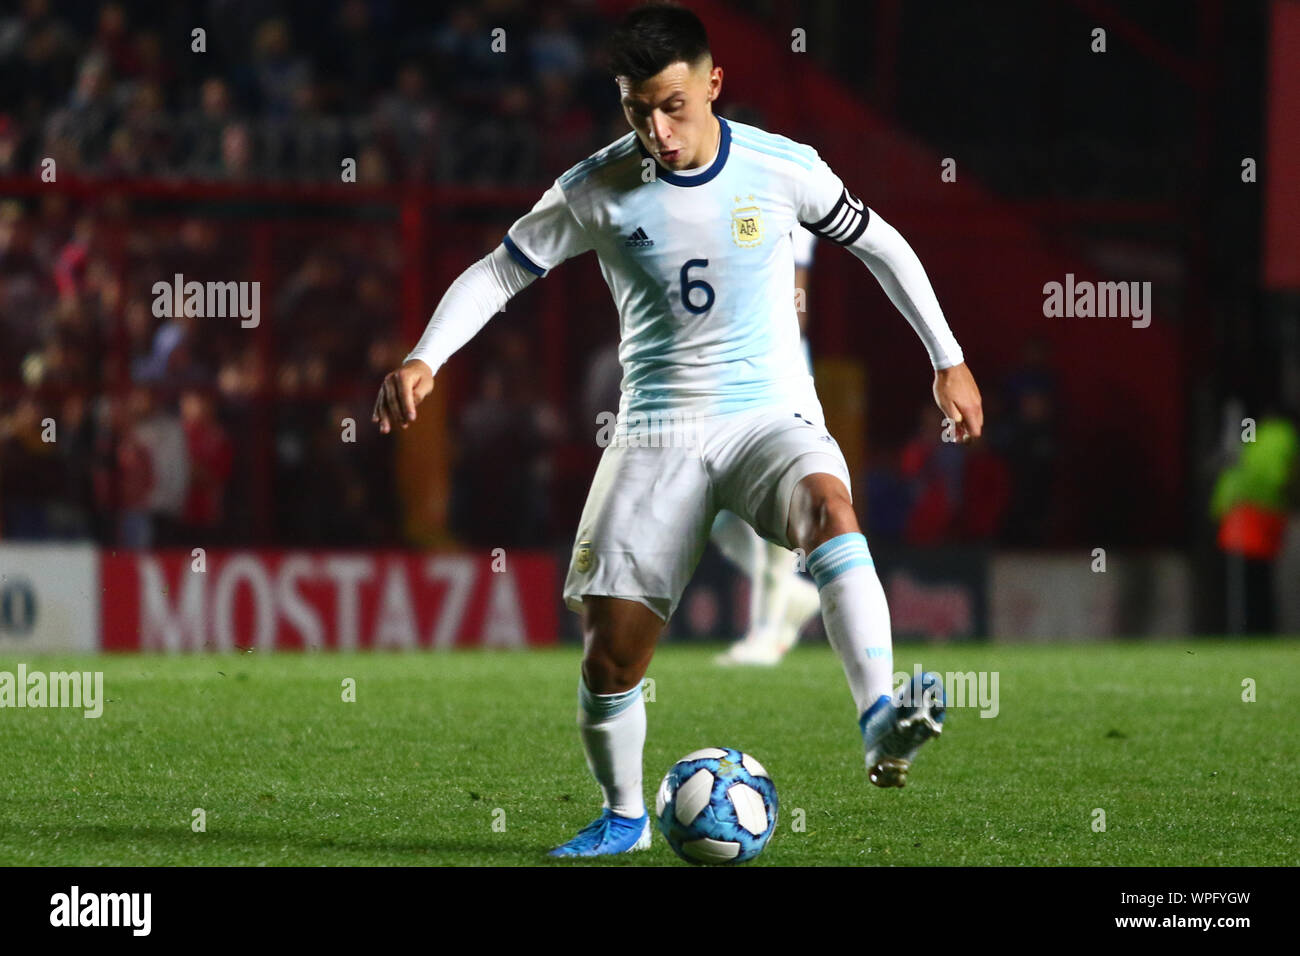 BUENOS AIRES, 08.09.2019: Lisandro Martinez during the match between Argentina and Colombia for friendly match on Diego Maradona Stadium in Buenos Air Stock Photo